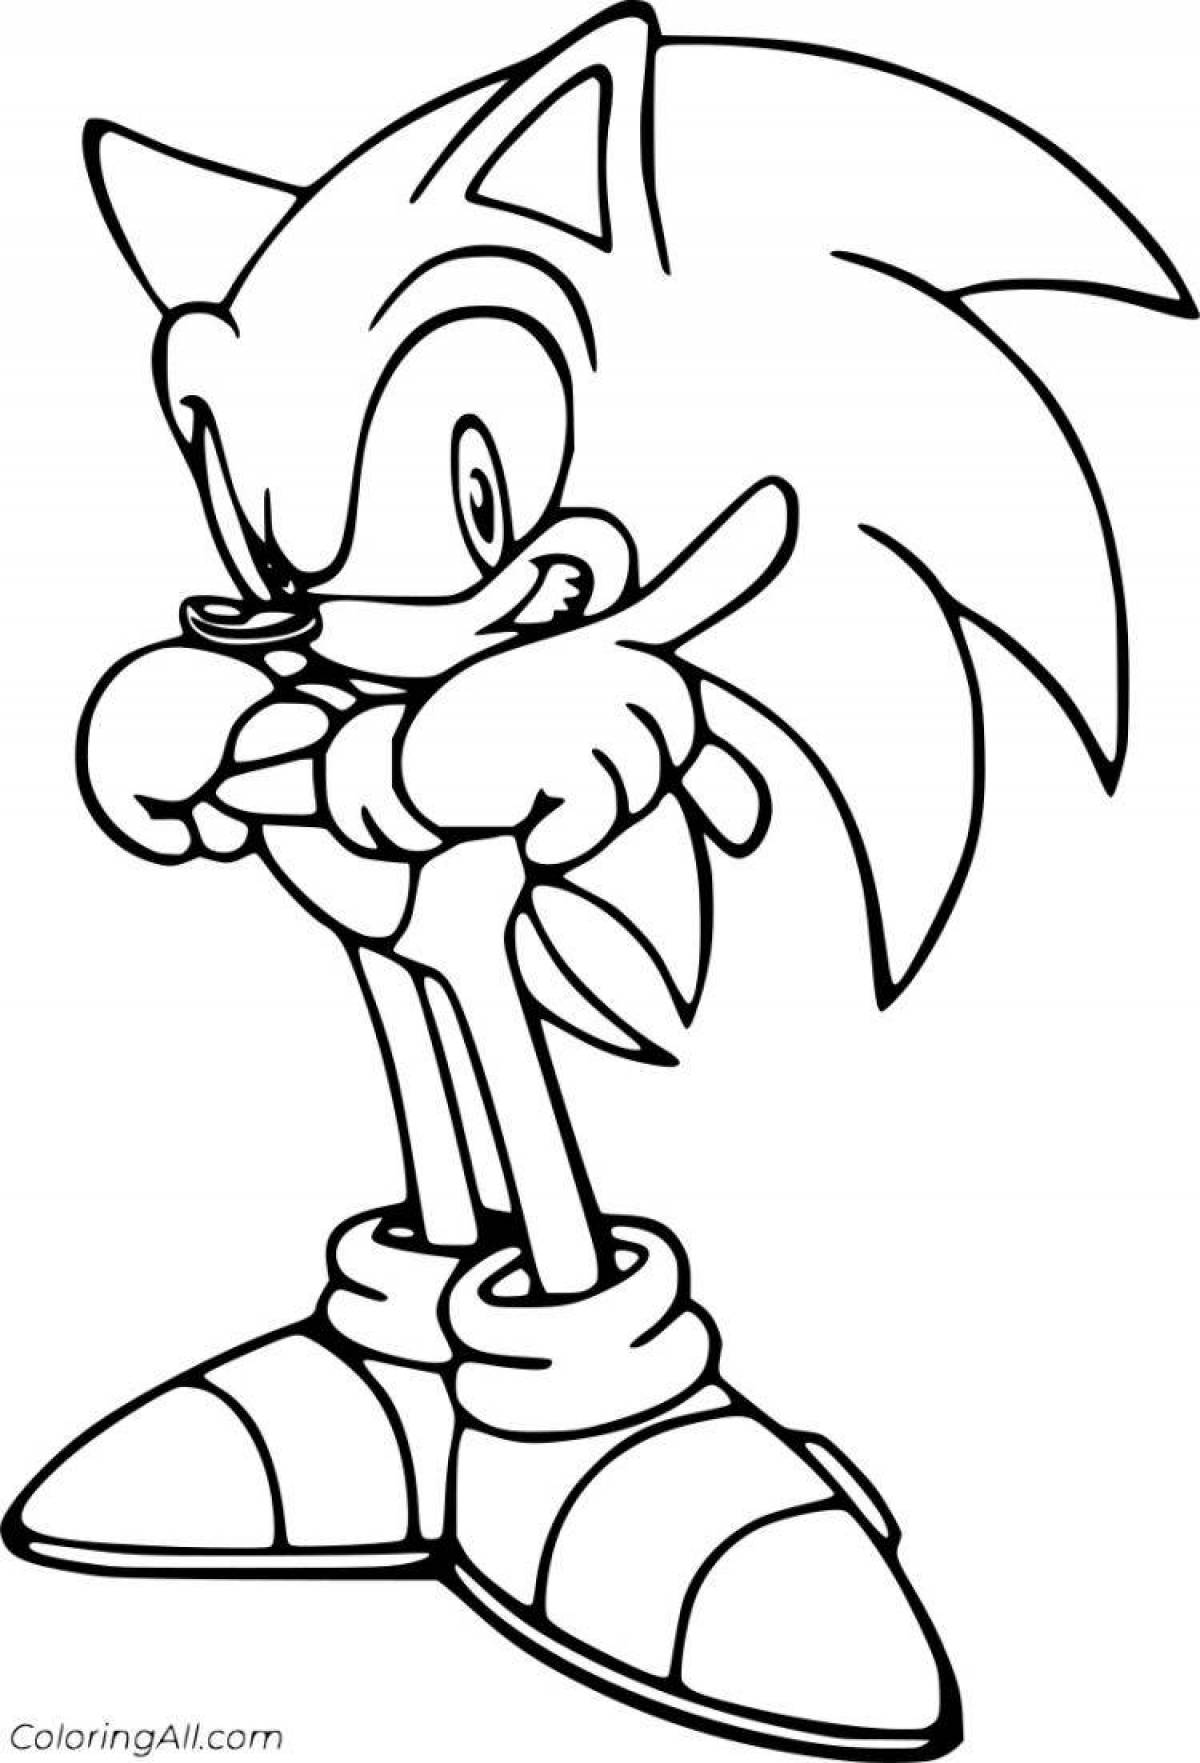 Sonic 2 marvelous coloring book